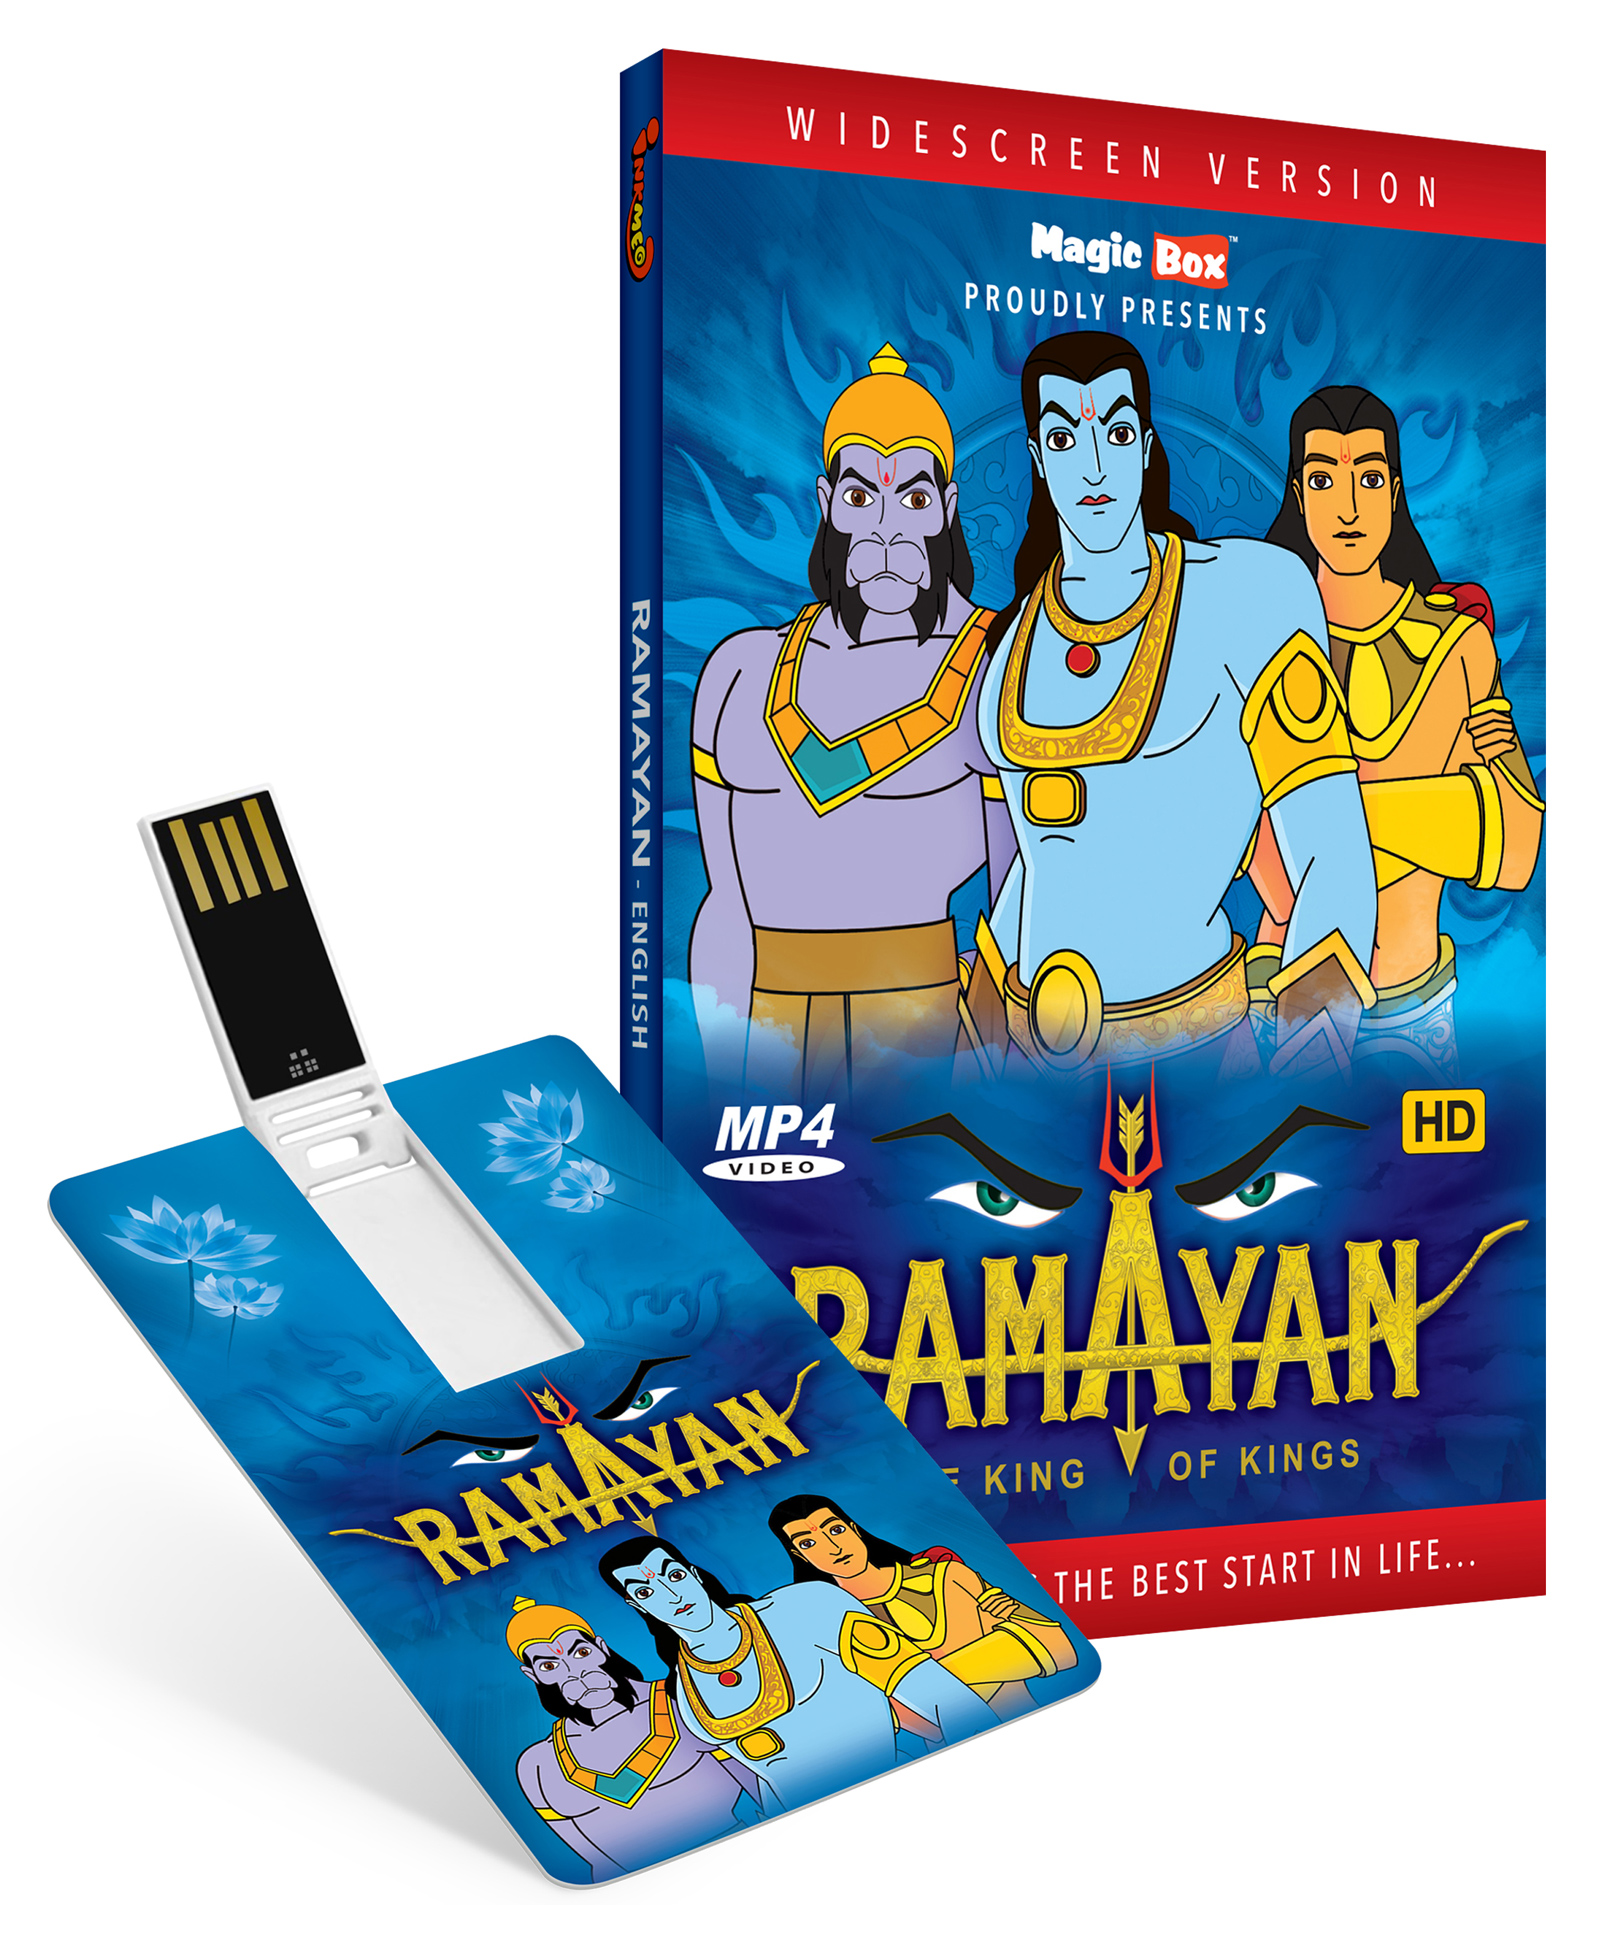 Inkmeo Movie Card Ramayan Stories 8GB High Definition MP4 Video USB Memory  Stick - English Online in India, Buy at Best Price from  -  8476746